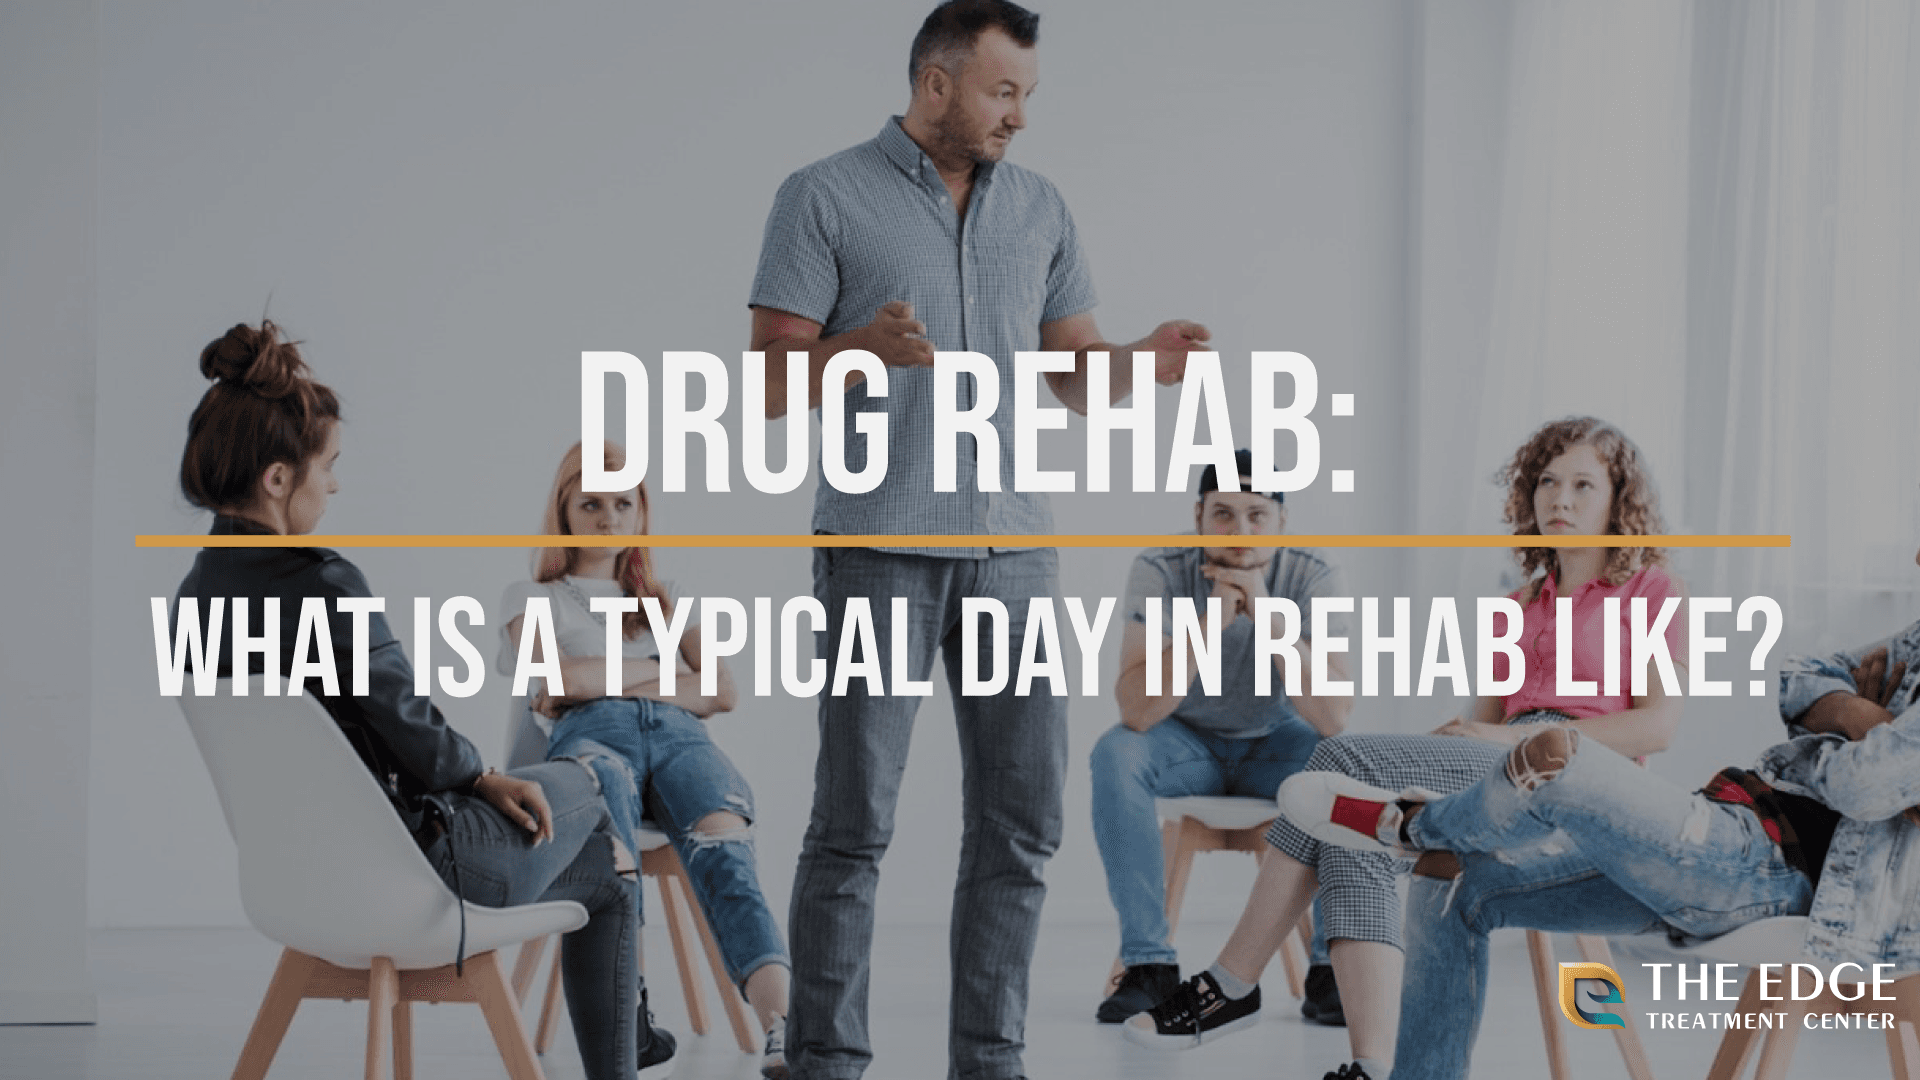 What a Typical Day in Drug Rehab is Like